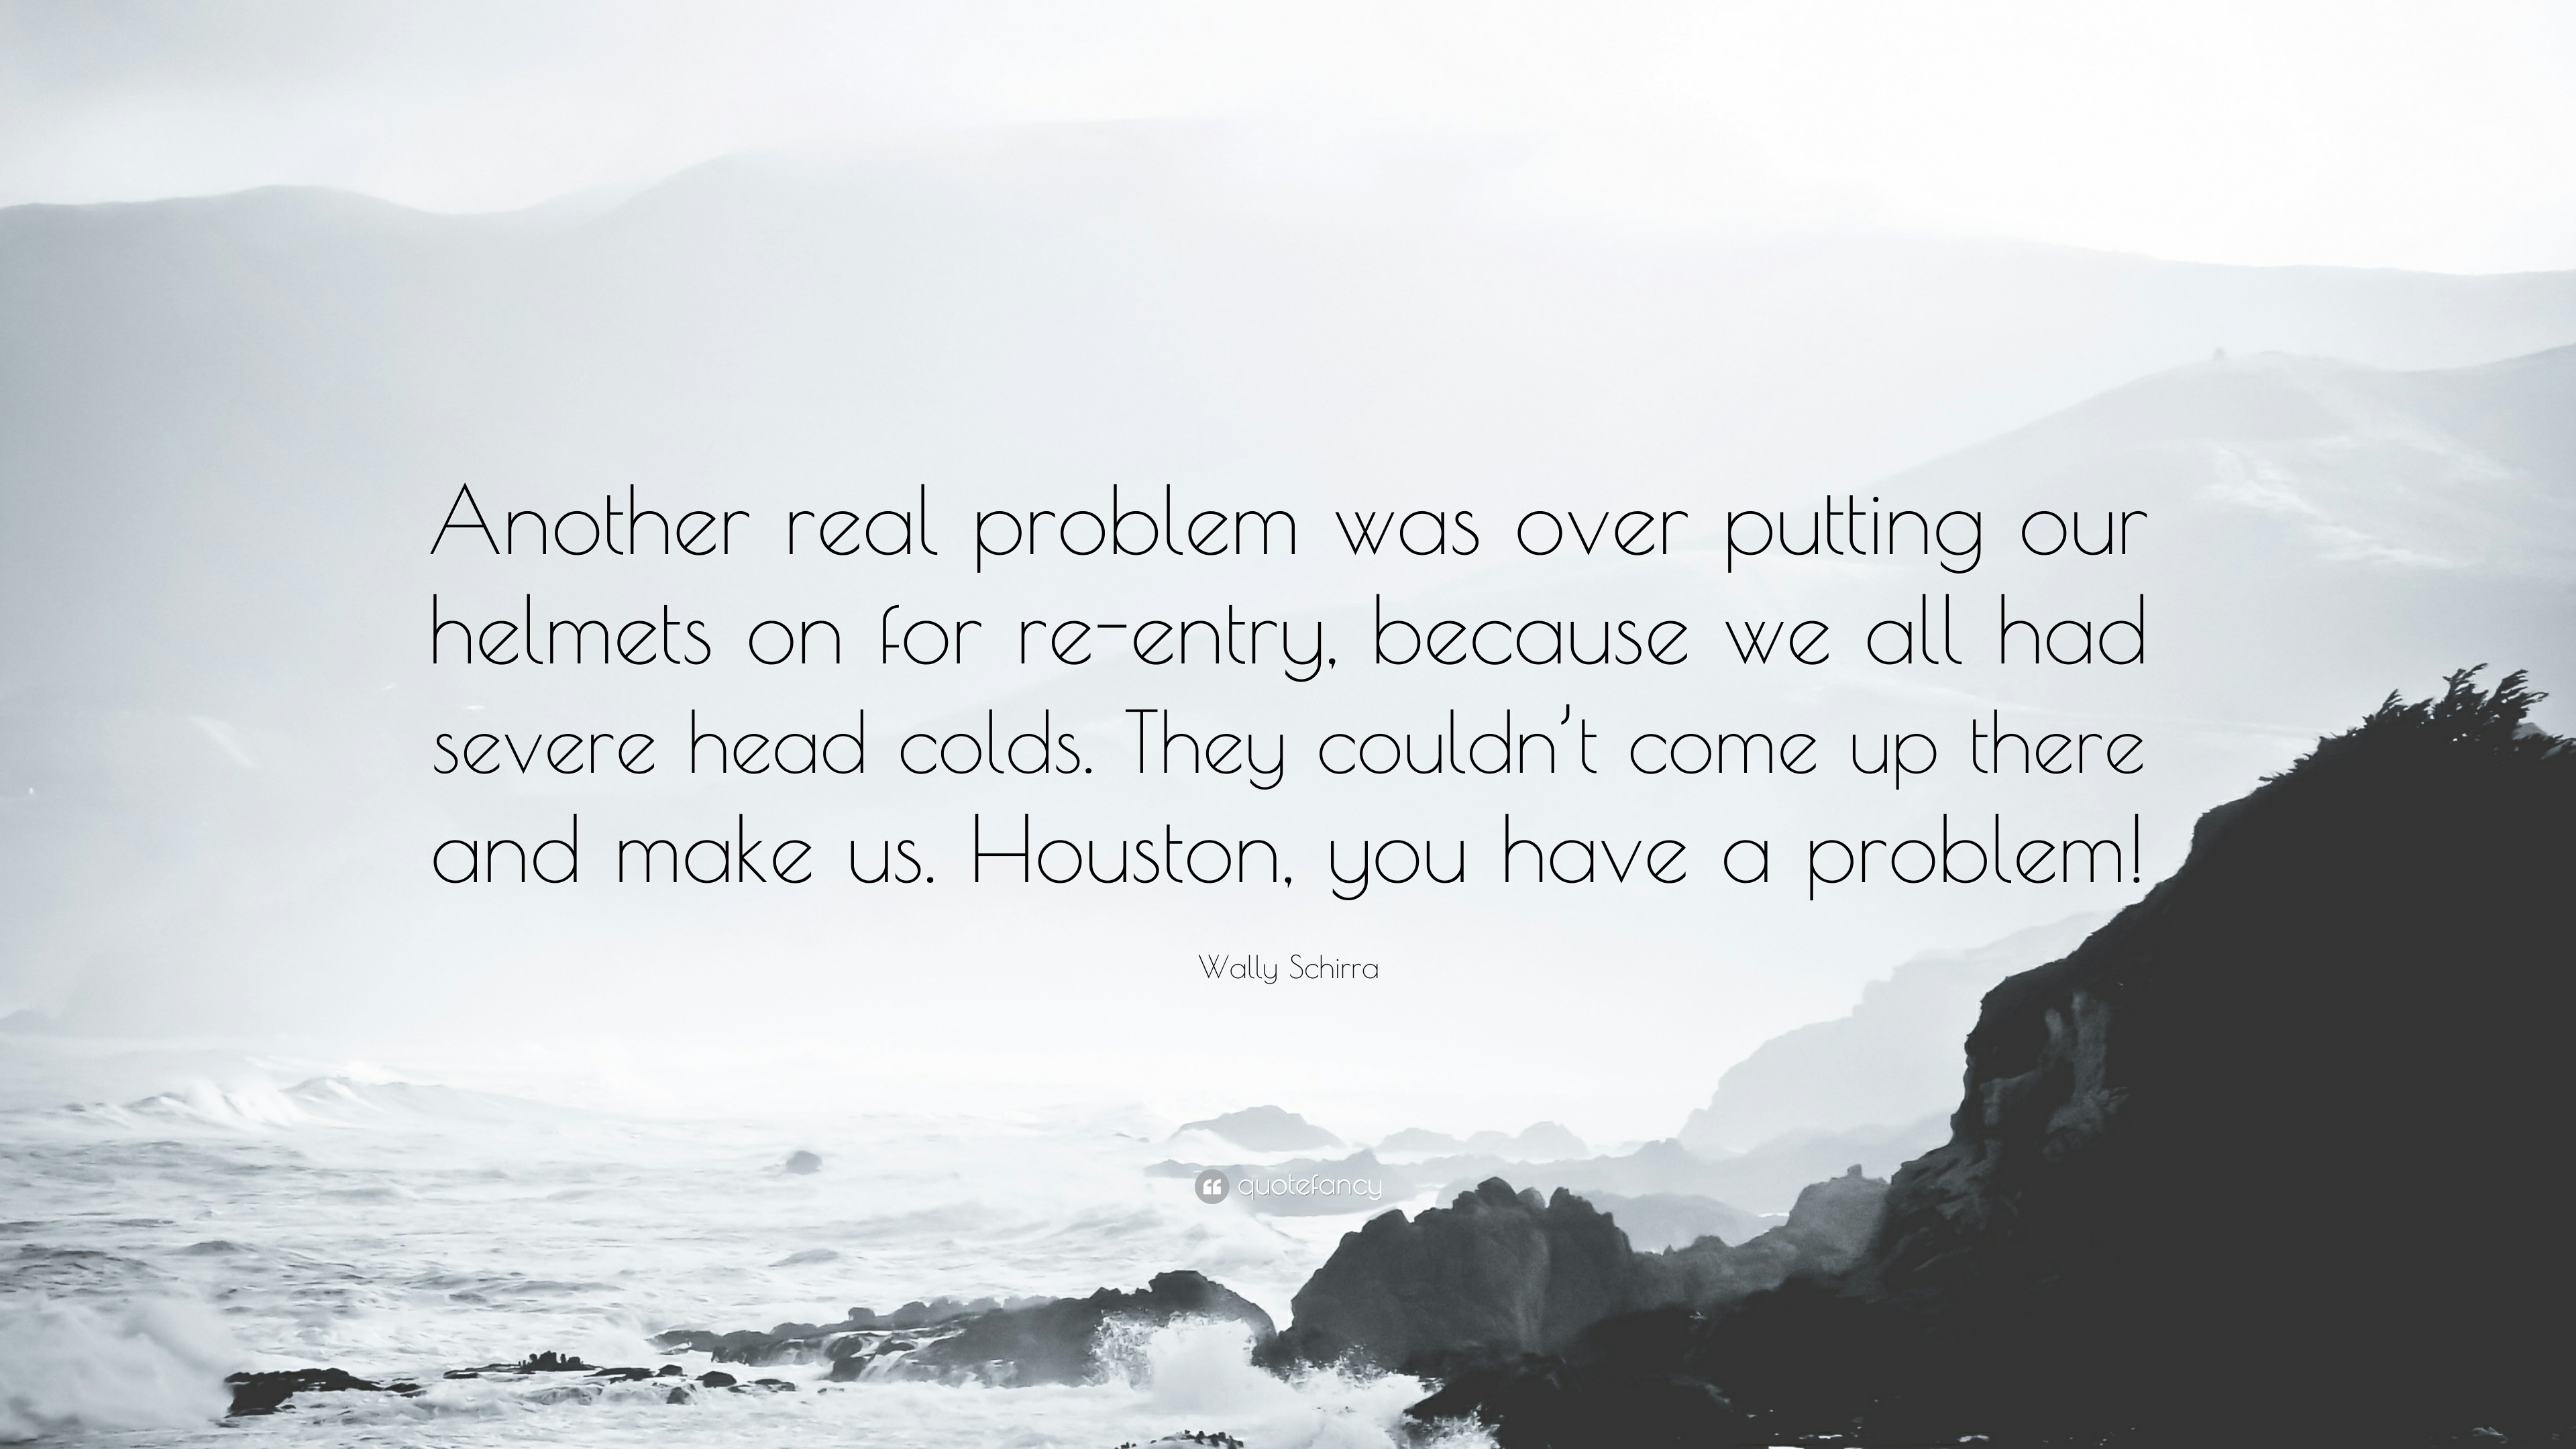 Houston, We Have A Problem': The True Story Behind The Misquote